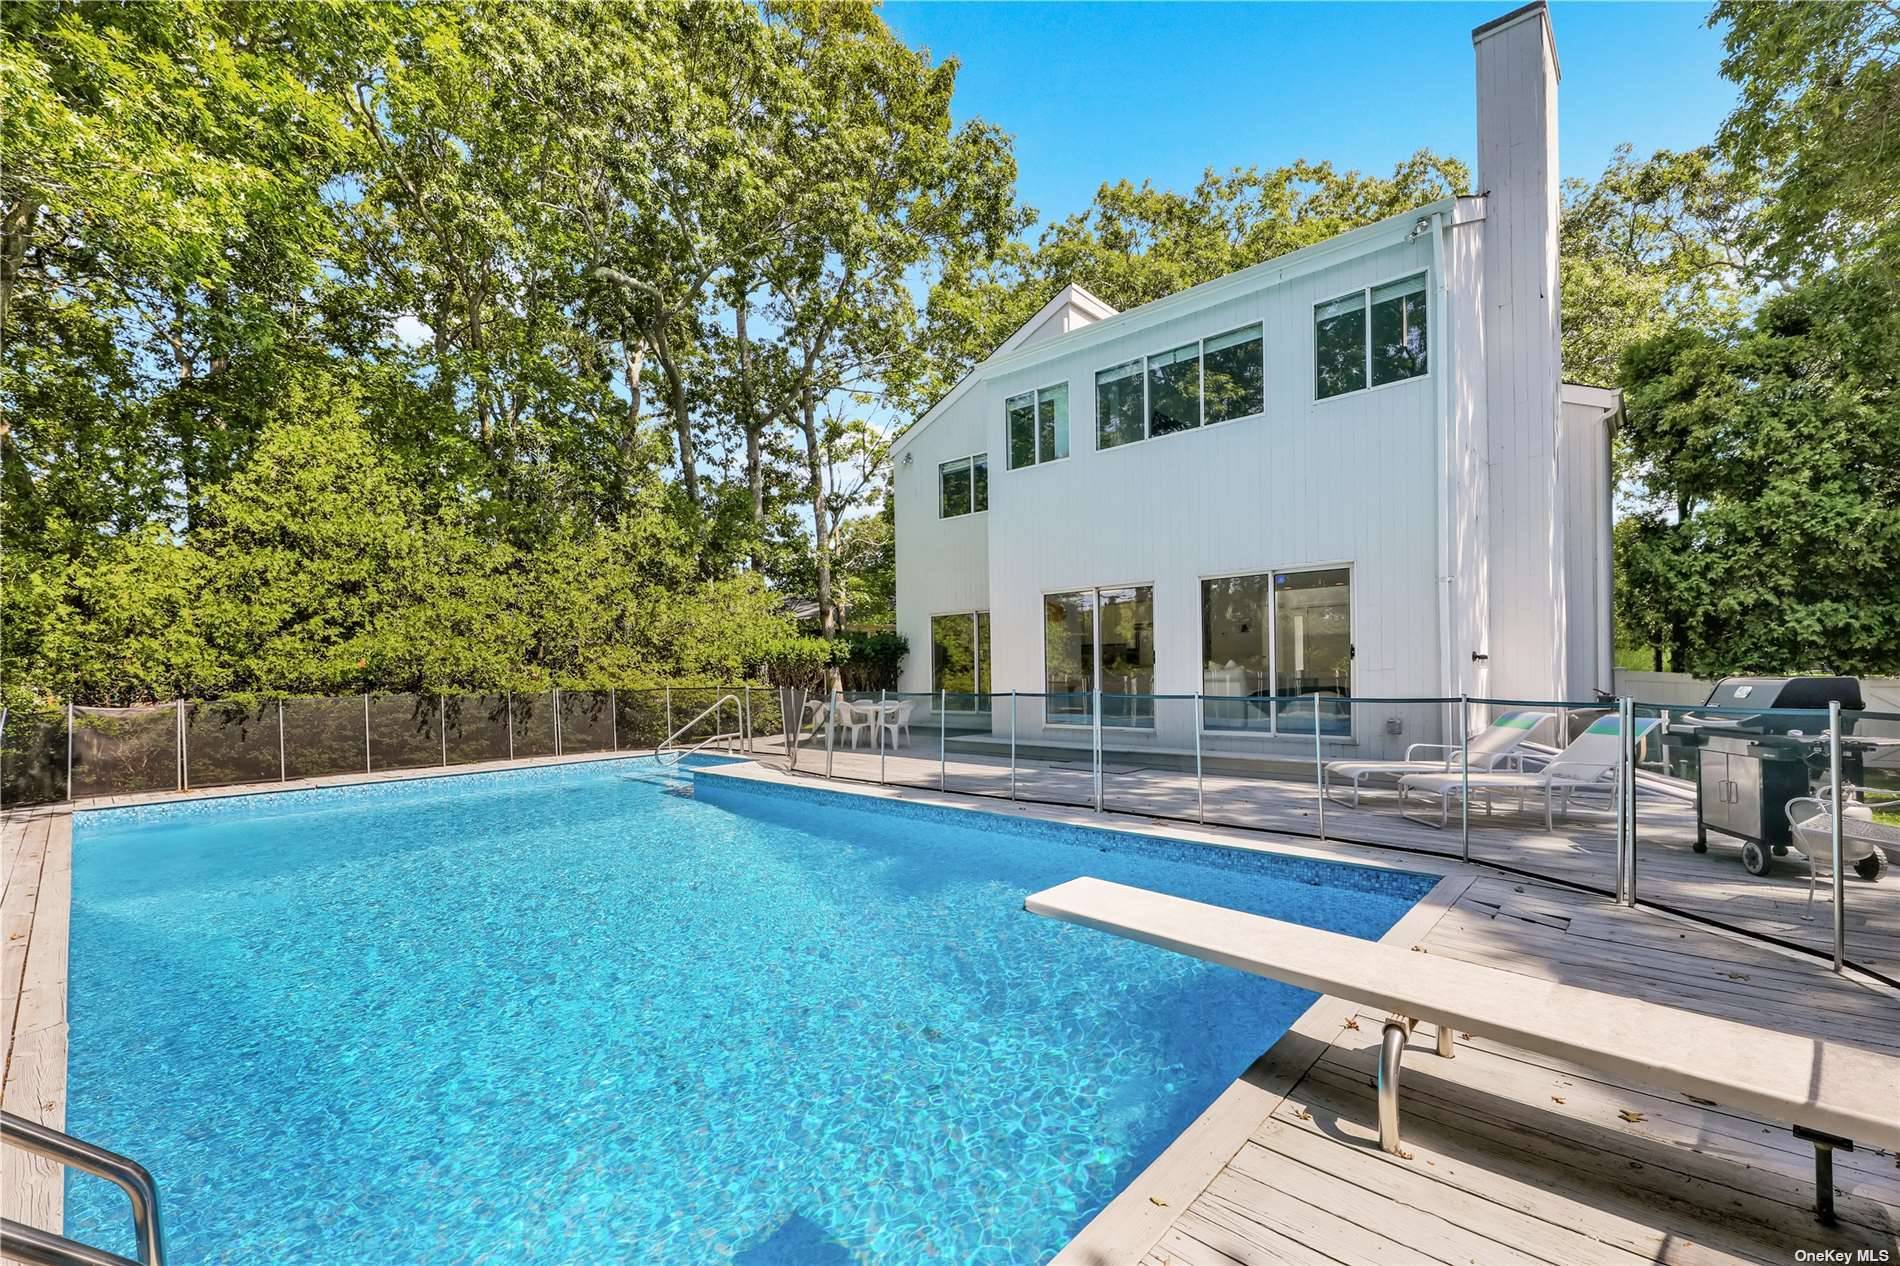 Rest. Relax. Recharge. Do it all at this Westhampton abode !